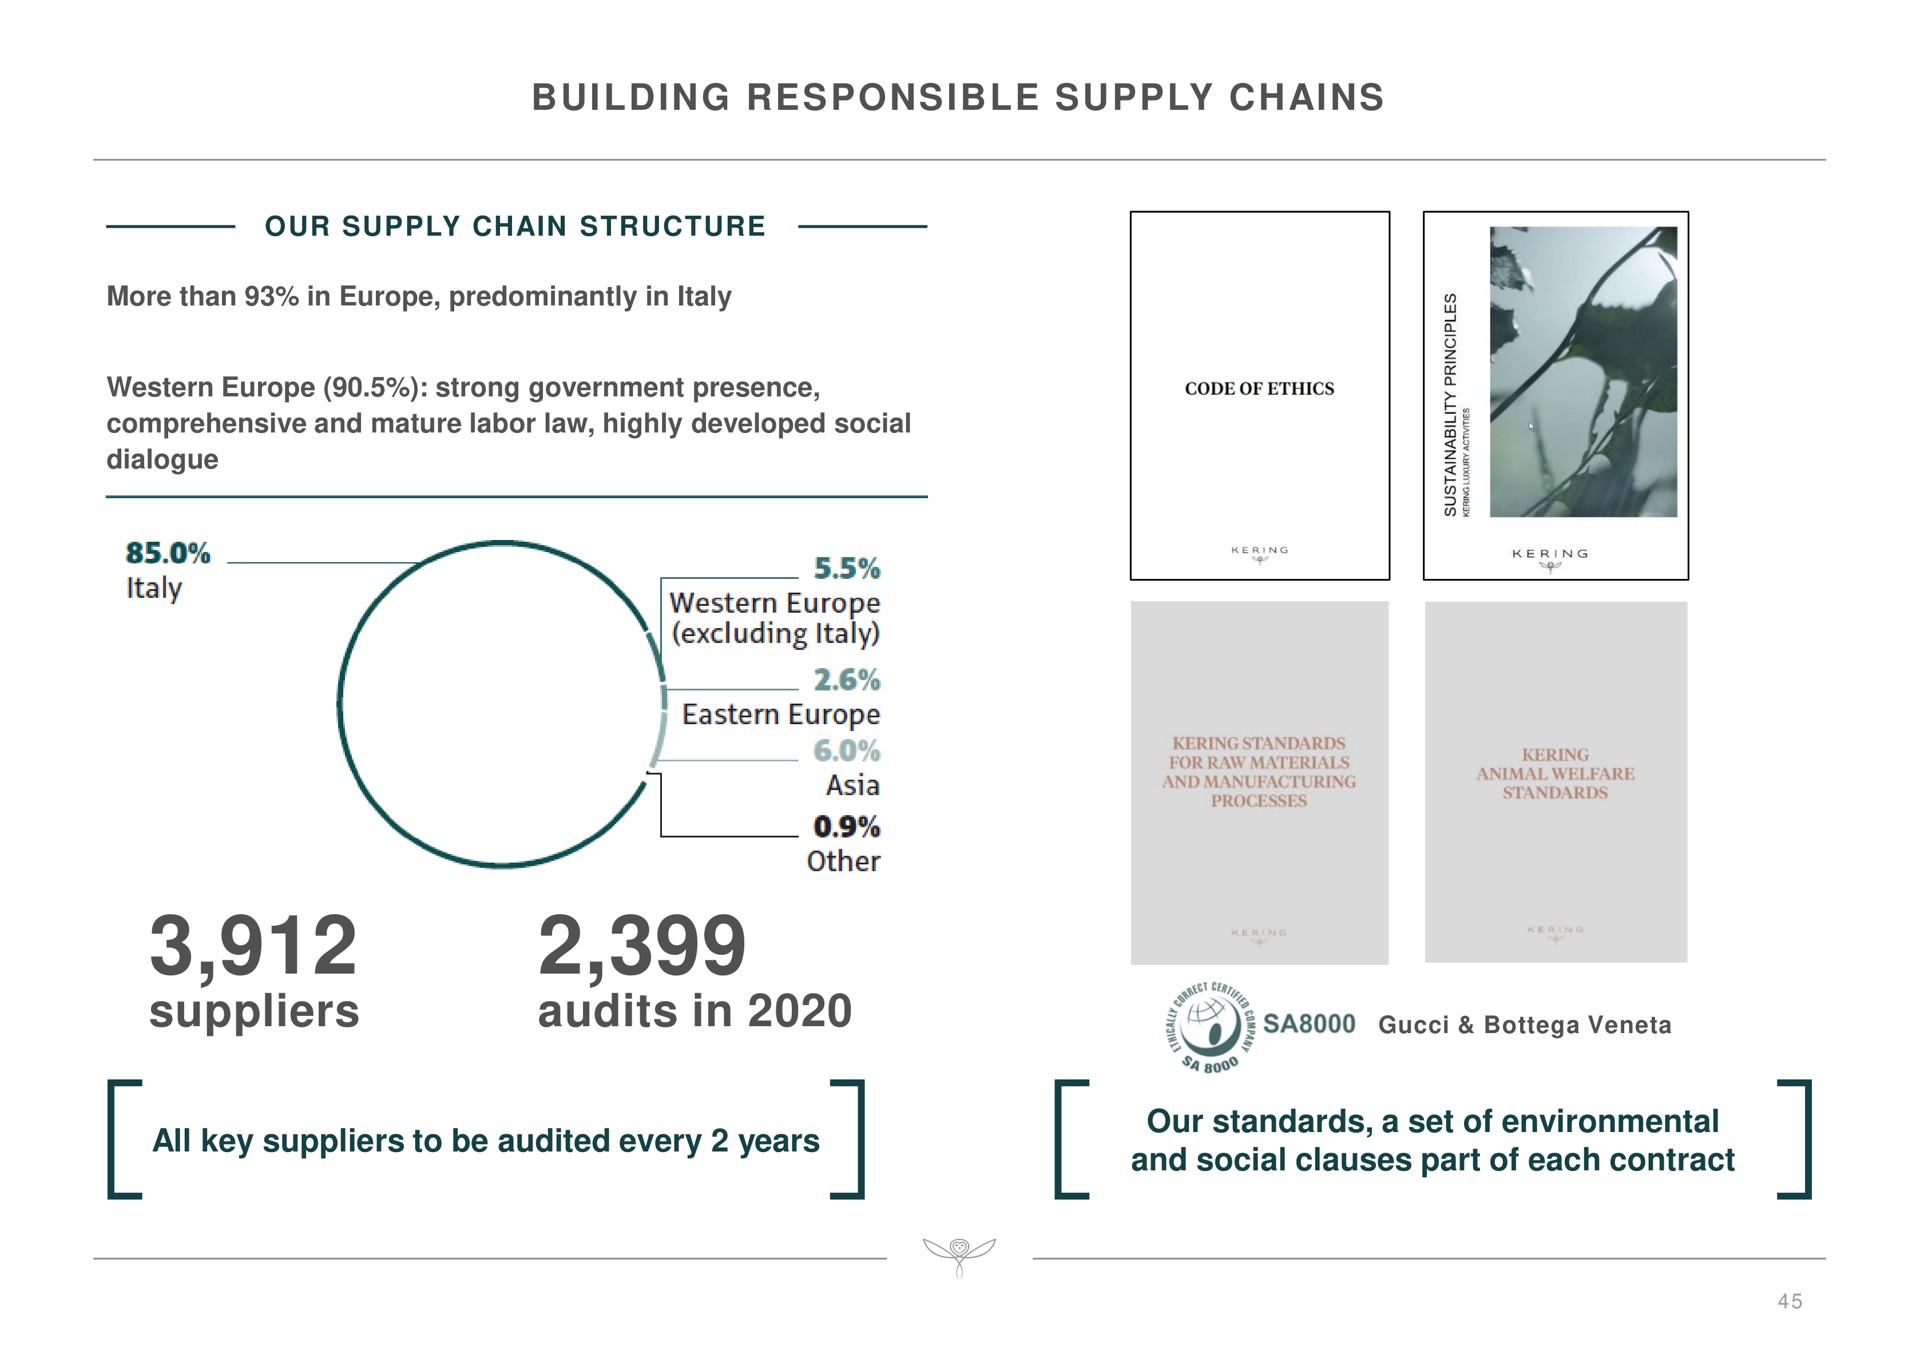 building responsible supply chains suppliers audits in all key suppliers to be audited every years our standards a set of environmental and social clauses part of each contract | Kering